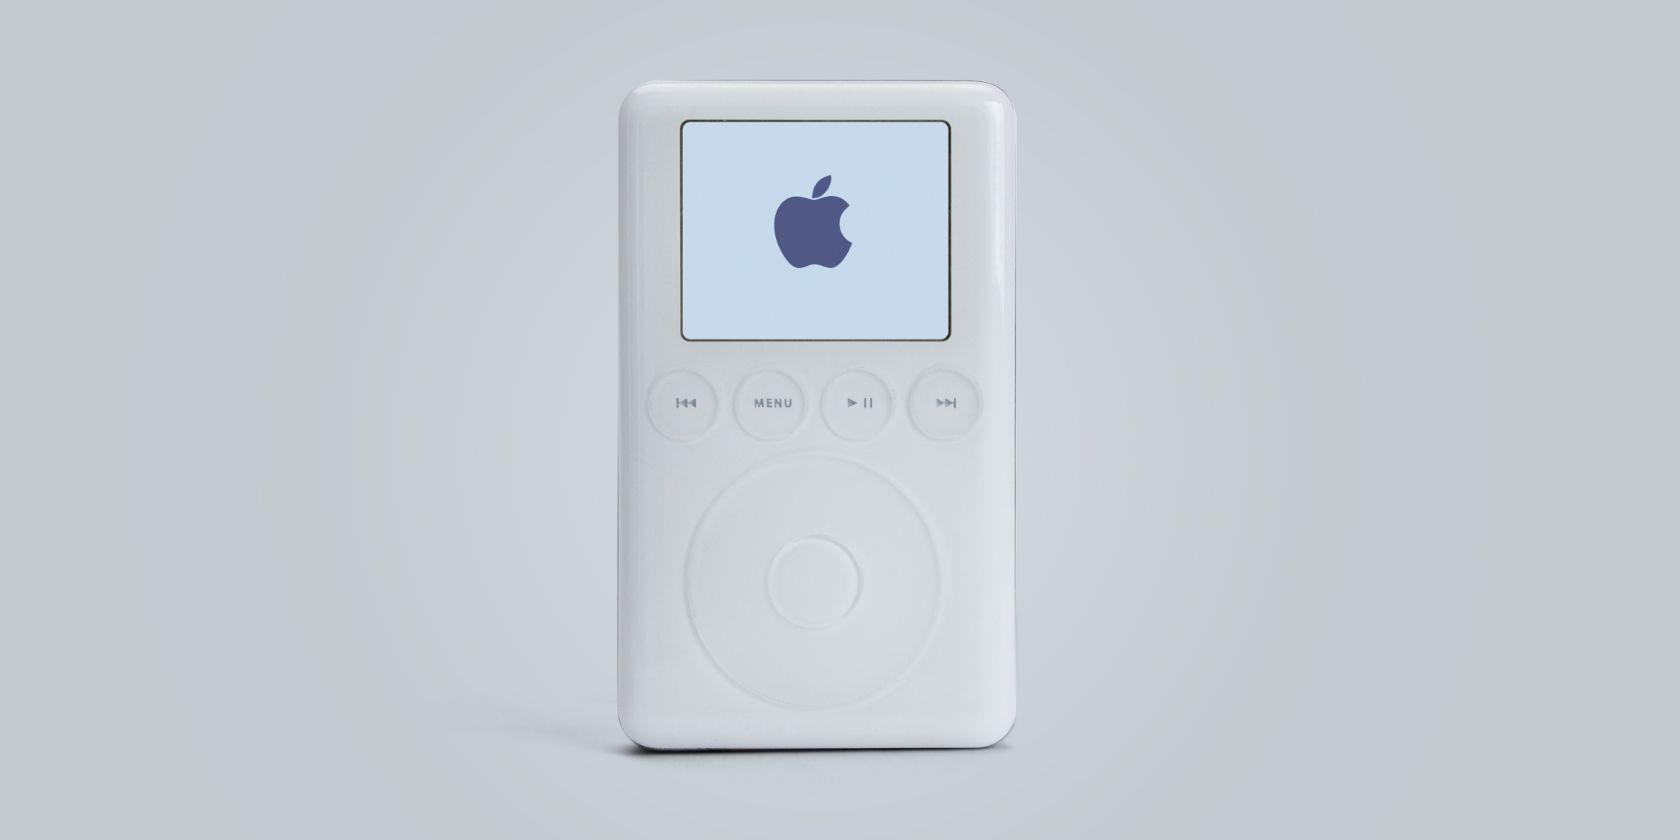 A third-generation iPod starting up, displaying the Apple logo